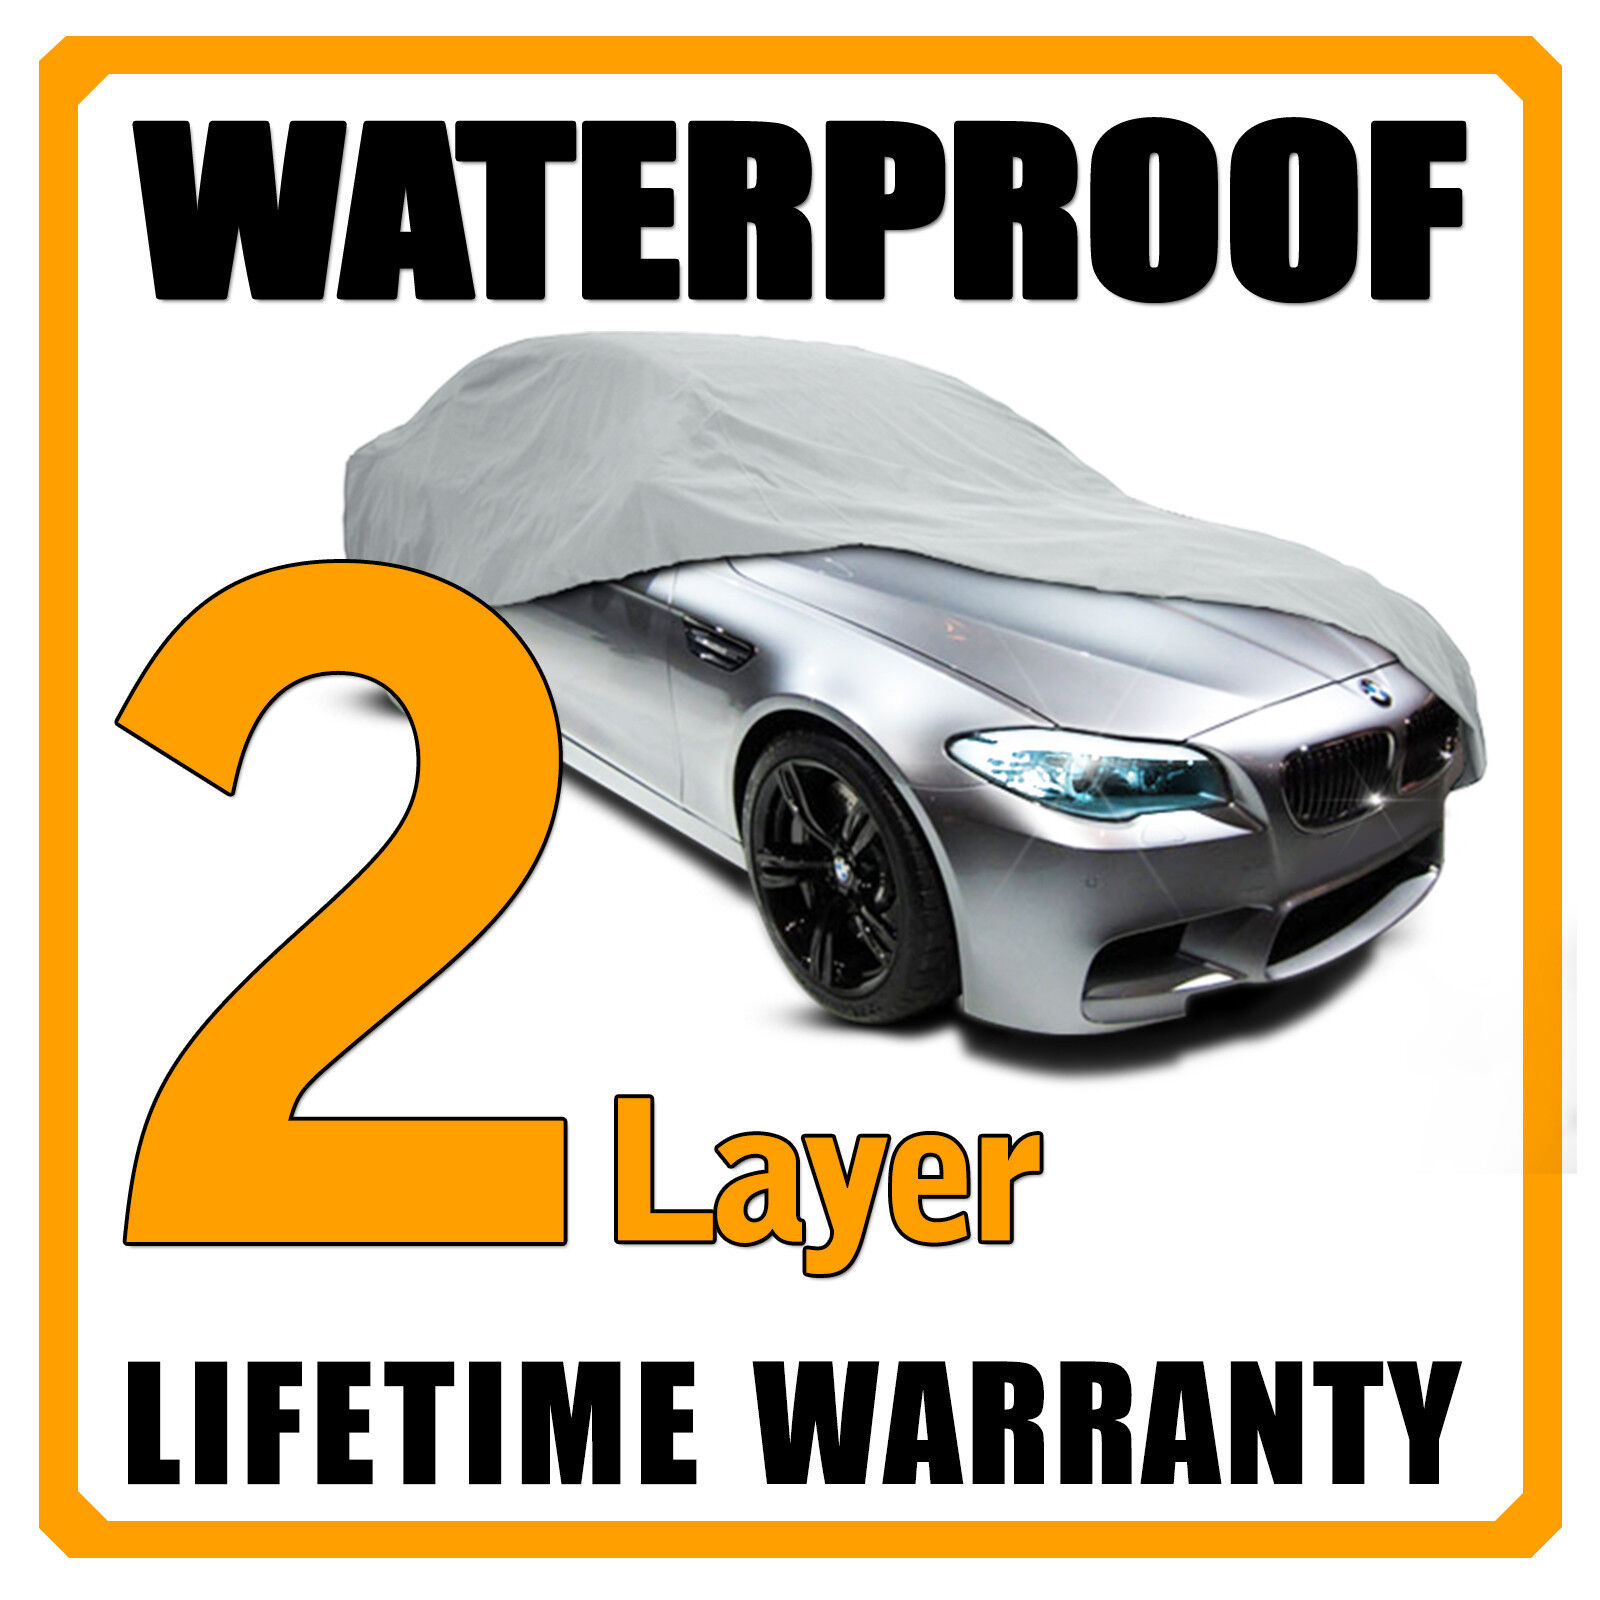 2 Layer Car Cover Breathable Waterproof Layers Outdoor Indoor Fleece Lining Fic